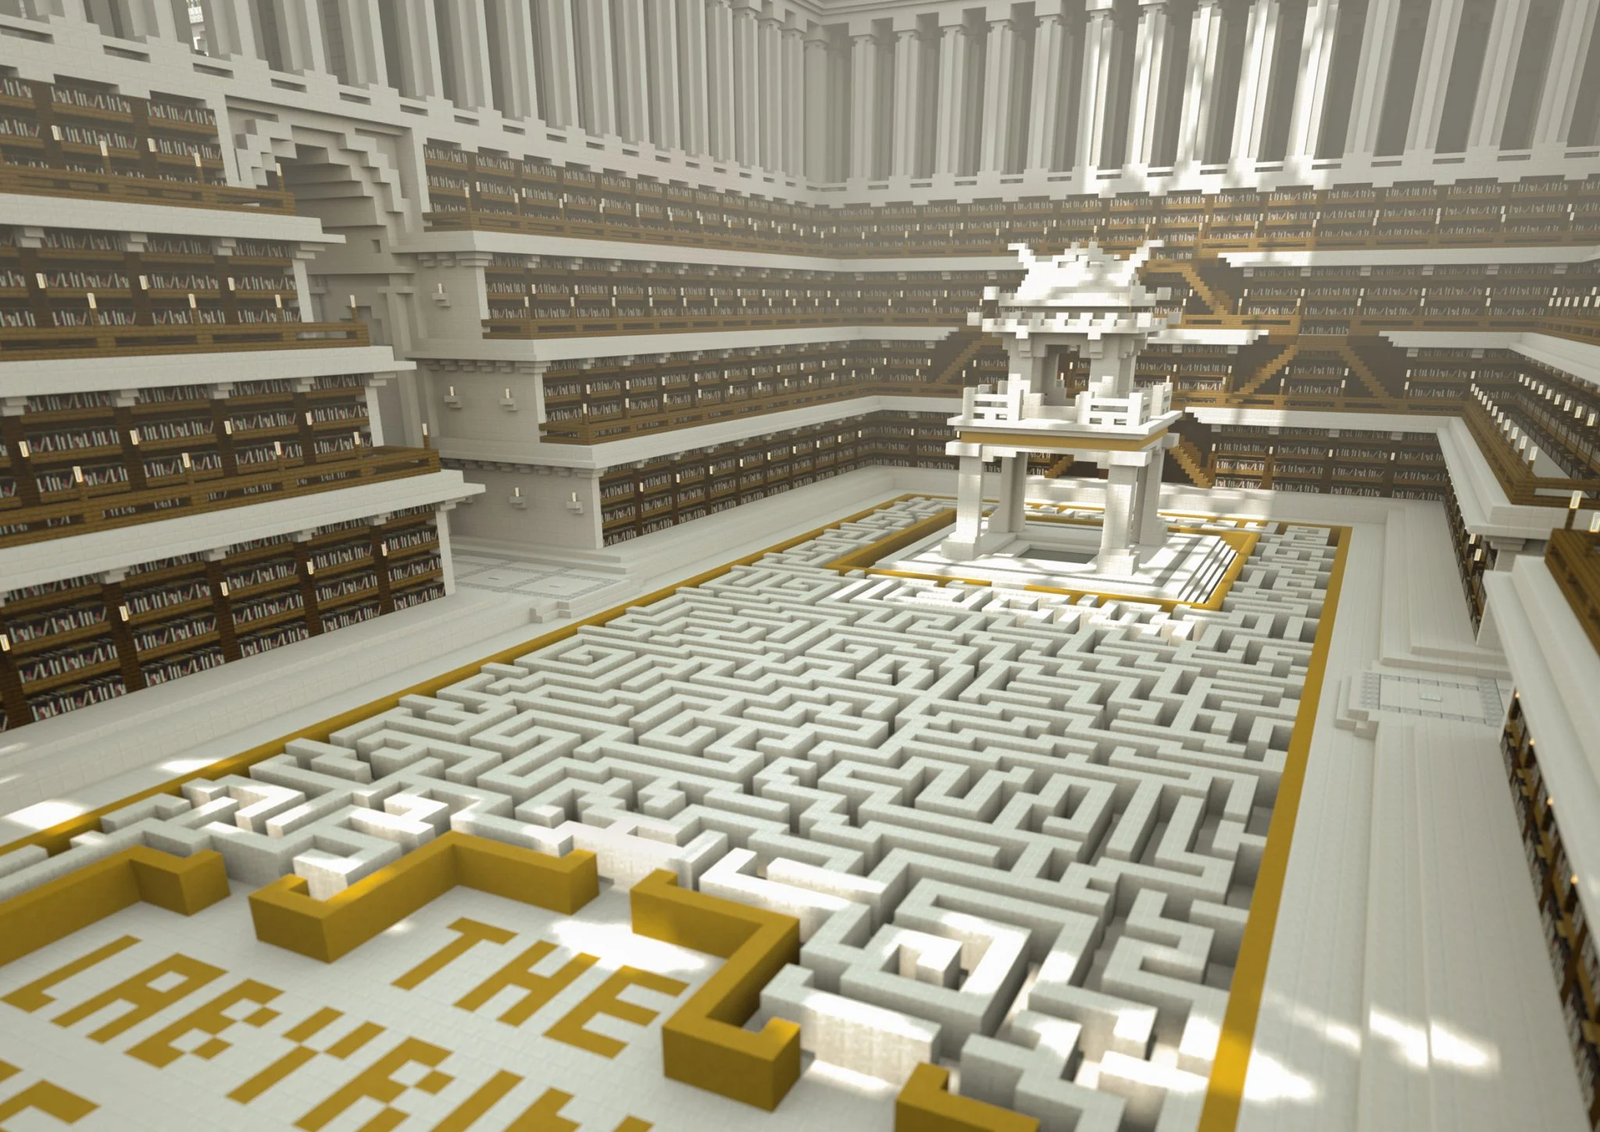 uncensored-library-reporters-without-borders-minecraft-technology-_dezeen_2364_col_2-2048x1449.webp